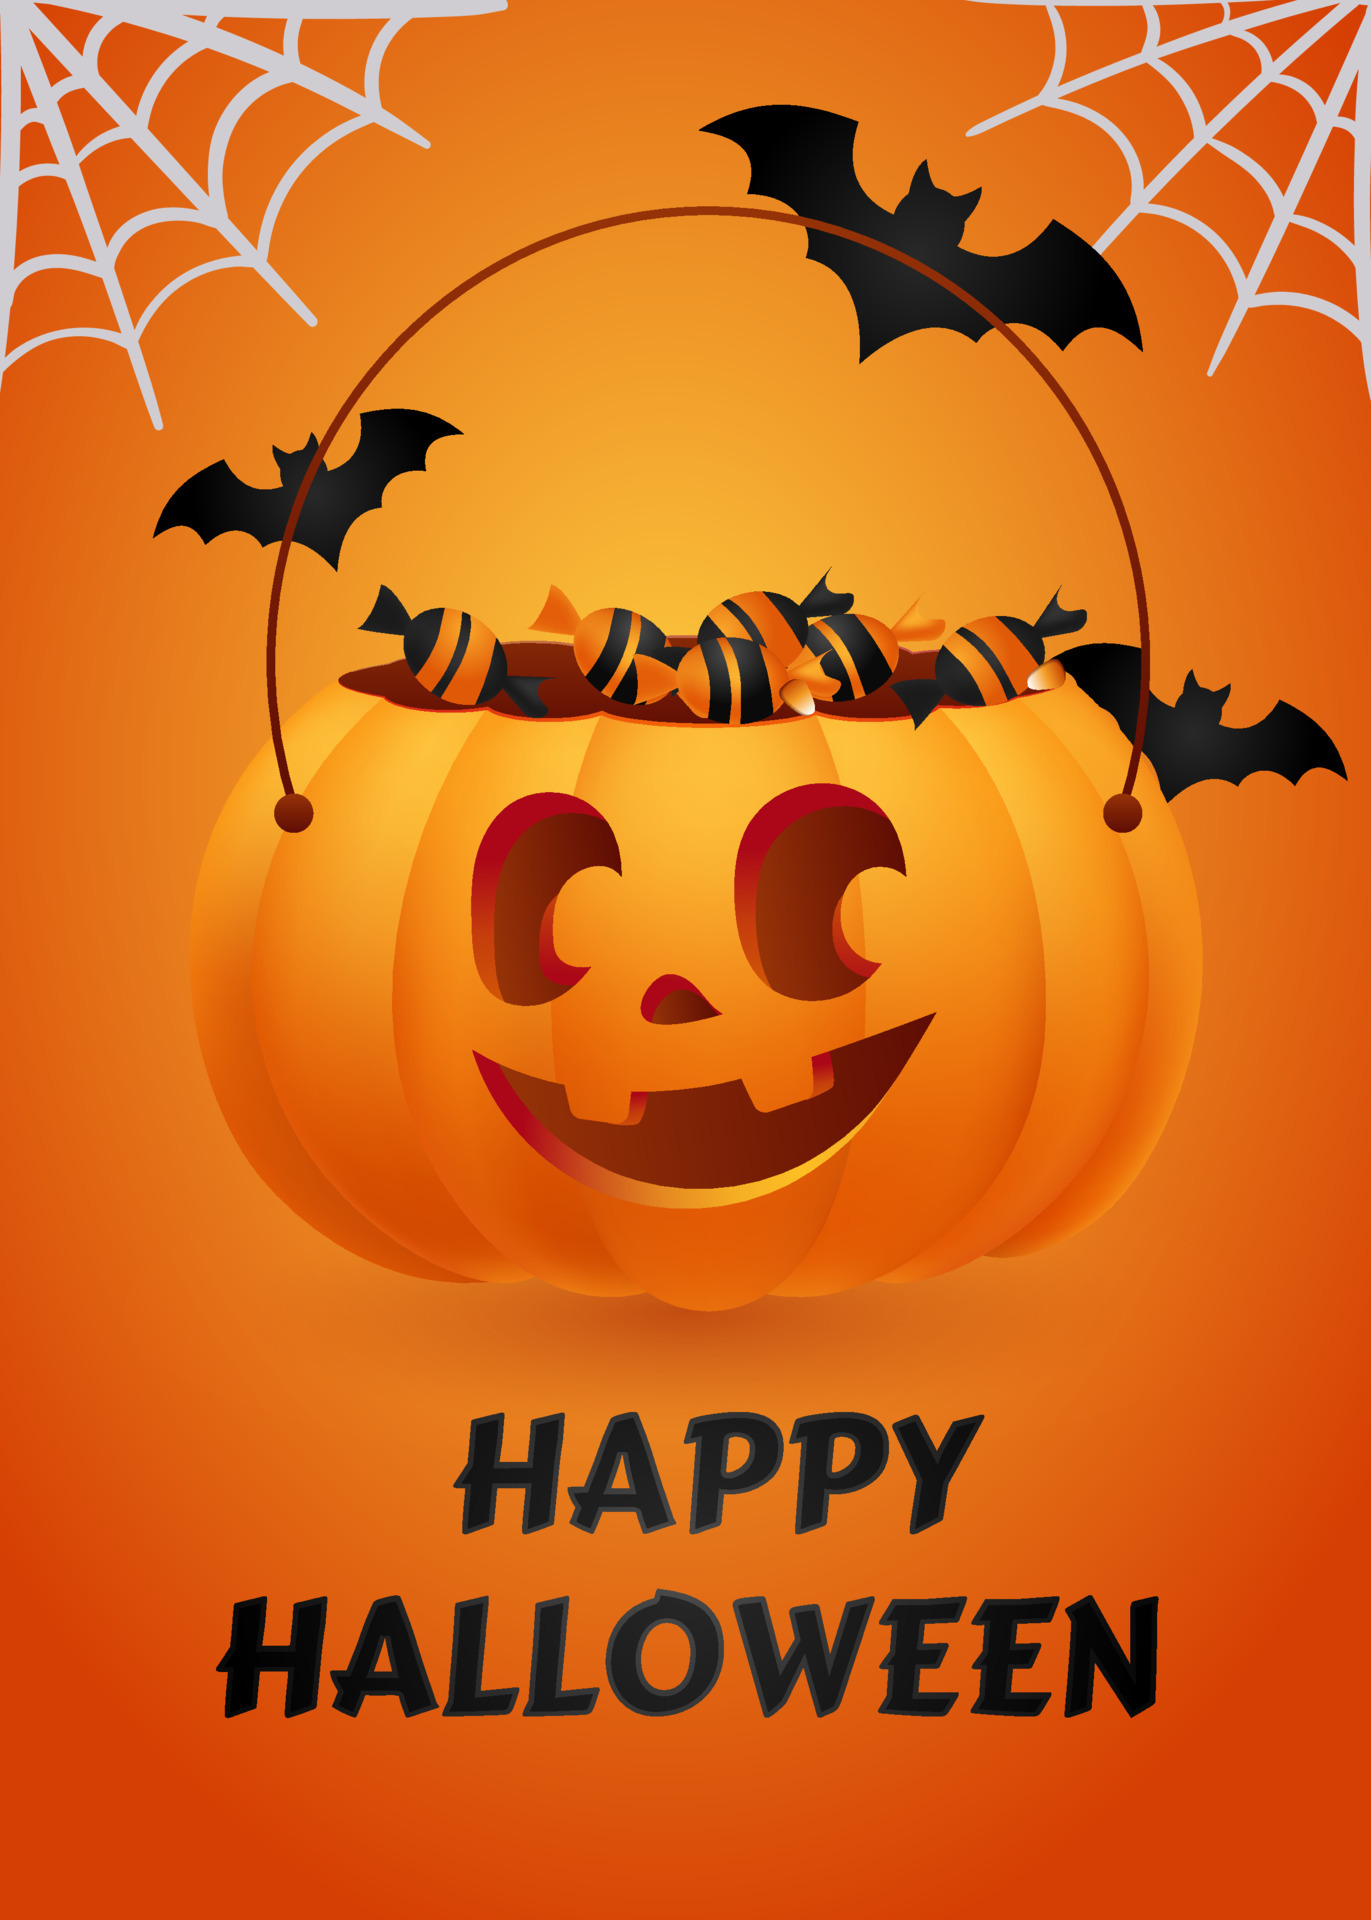 happy halloween poster for party banner or invitation orange candy bag pumpkin jack o lantern with carved